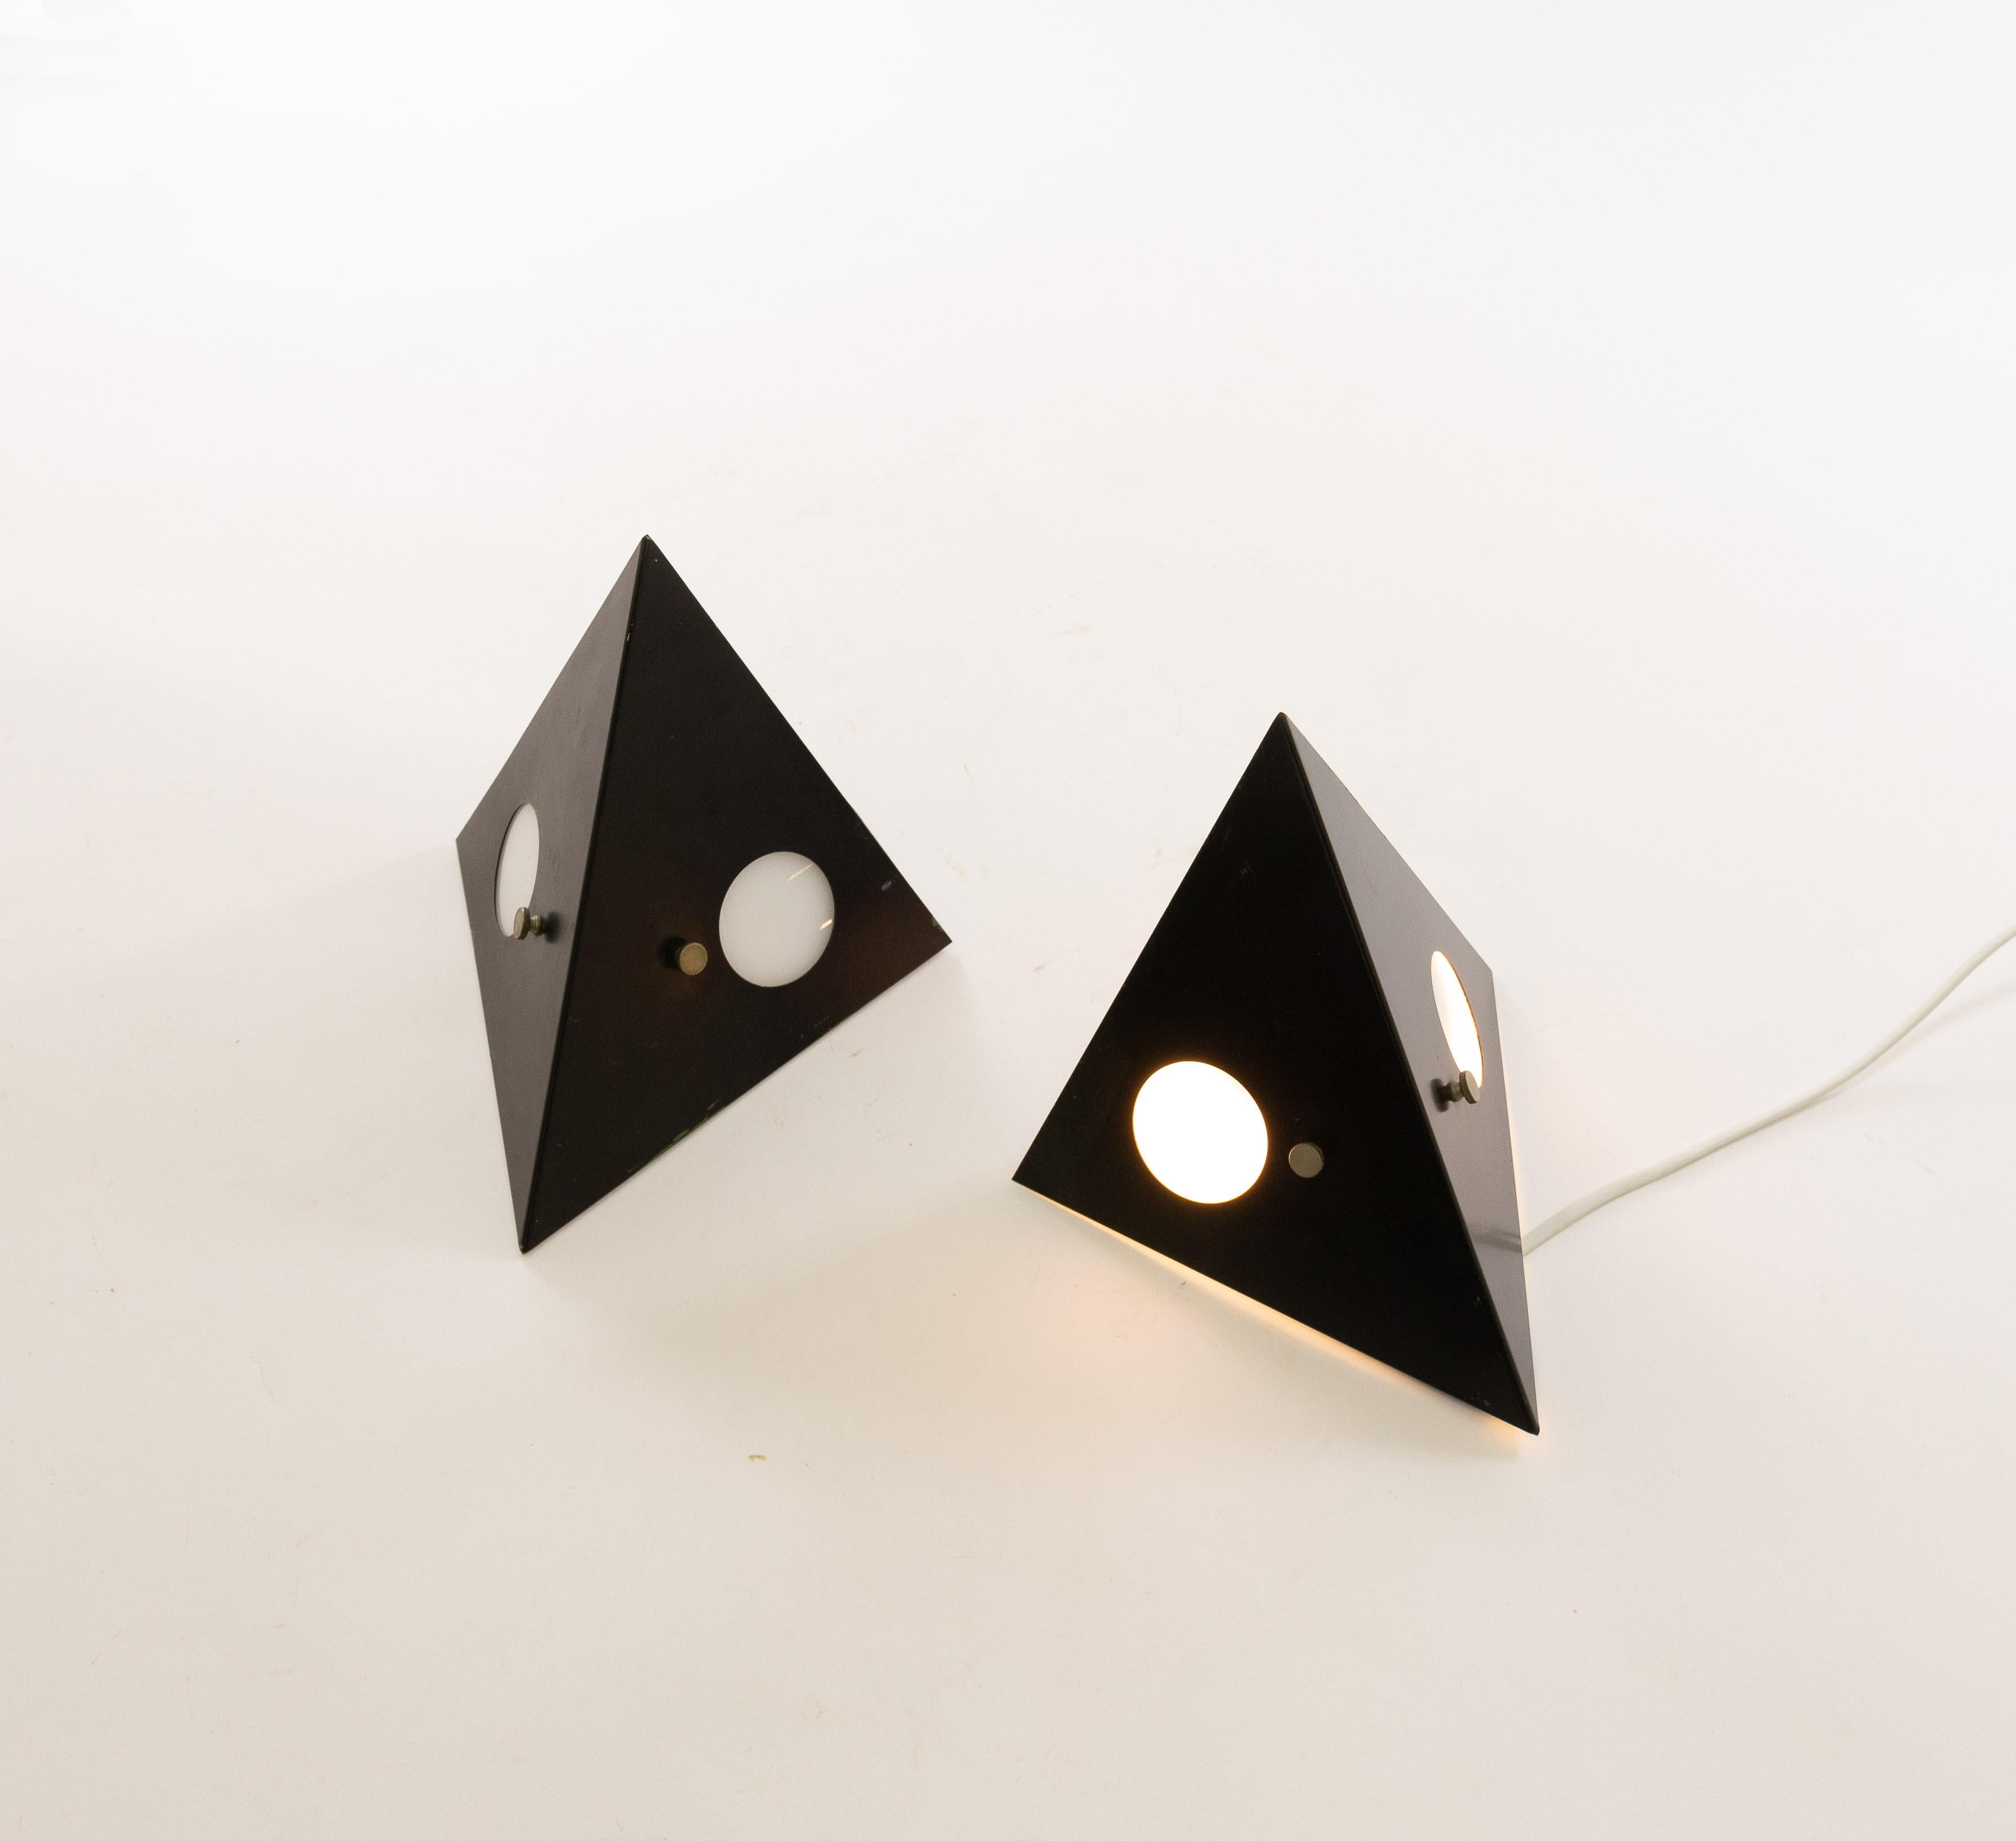 Model no. C-1651, nicknamed 'night owl', designed and manufactured by lighting company RAAK Amsterdam, 1960s. The lamps are intended as wall lamp, but they can also function as a table lamps. The two circular lights can be dimmed